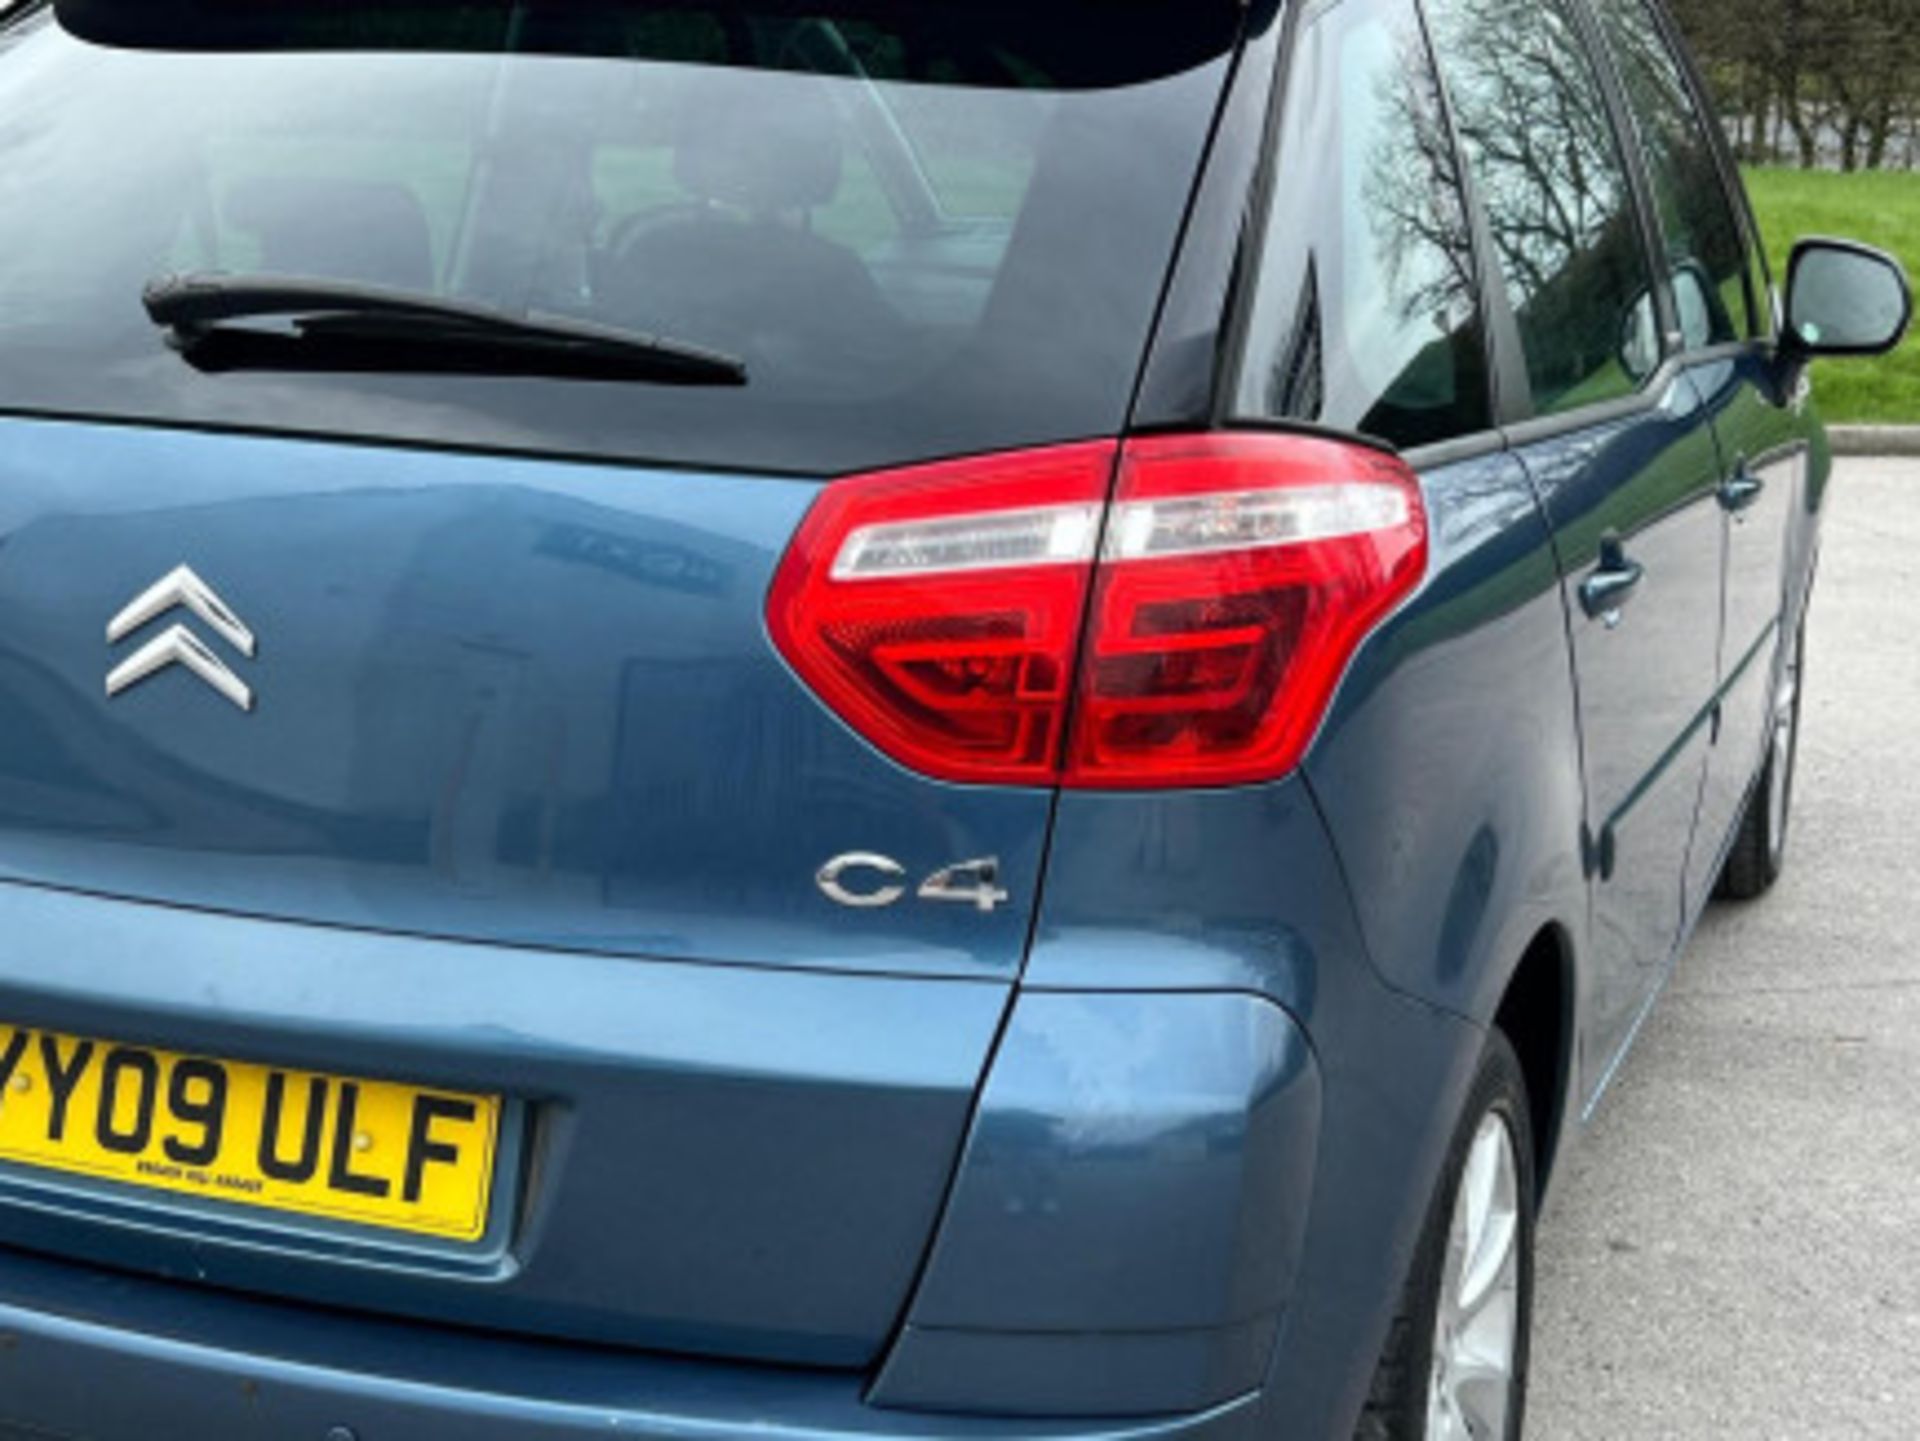 2009 CITROEN C4 PICASSO 1.6 HDI VTR+ EGS6 5DR >>--NO VAT ON HAMMER--<< - Image 21 of 123